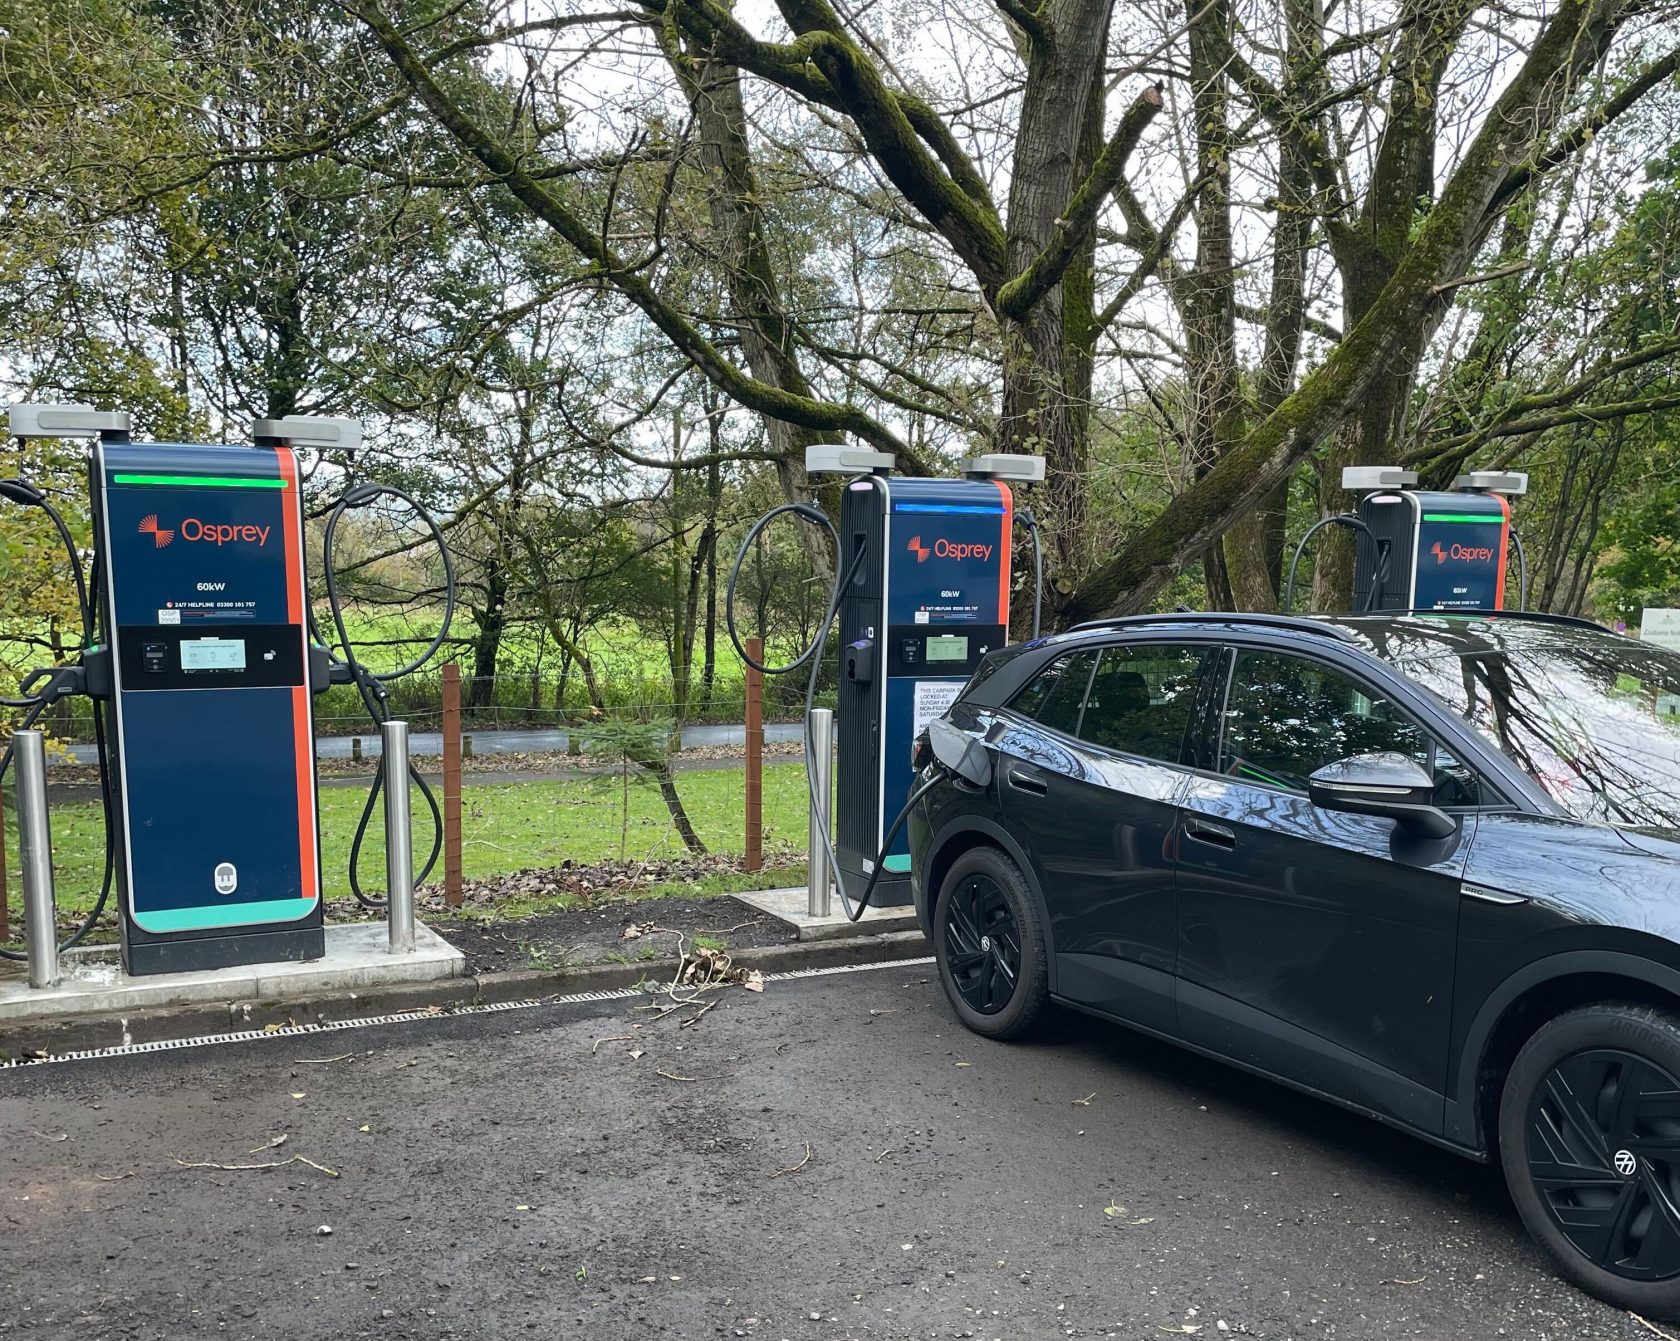 Osprey Charging Network has earned a strong reputation for providing a reliable and straightforward EV charging experience